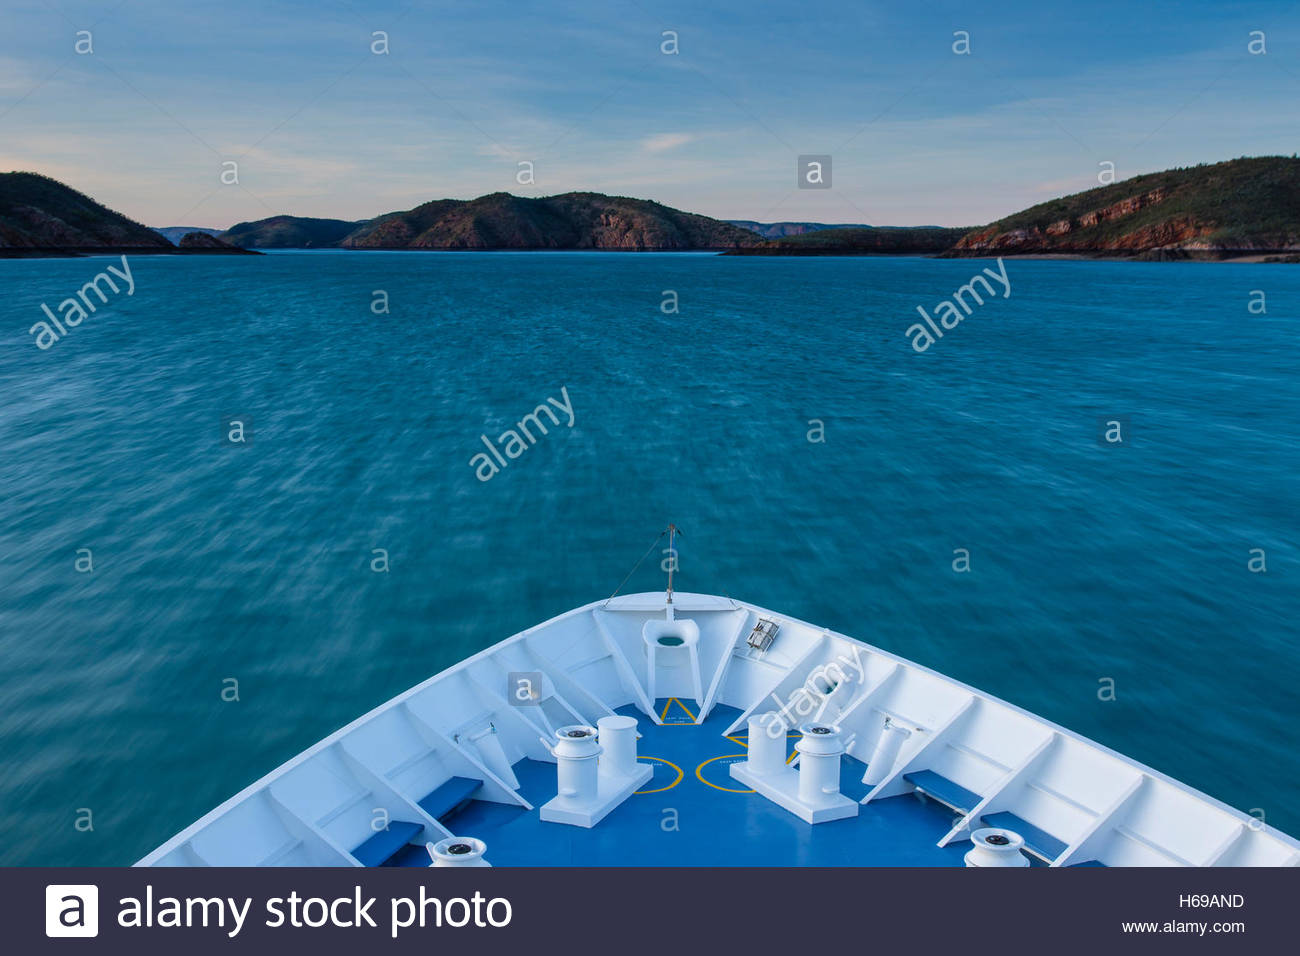 The view from a boat bow on Talbot Bay in the Kimberley Region of Northwest Australia. Stock Photo